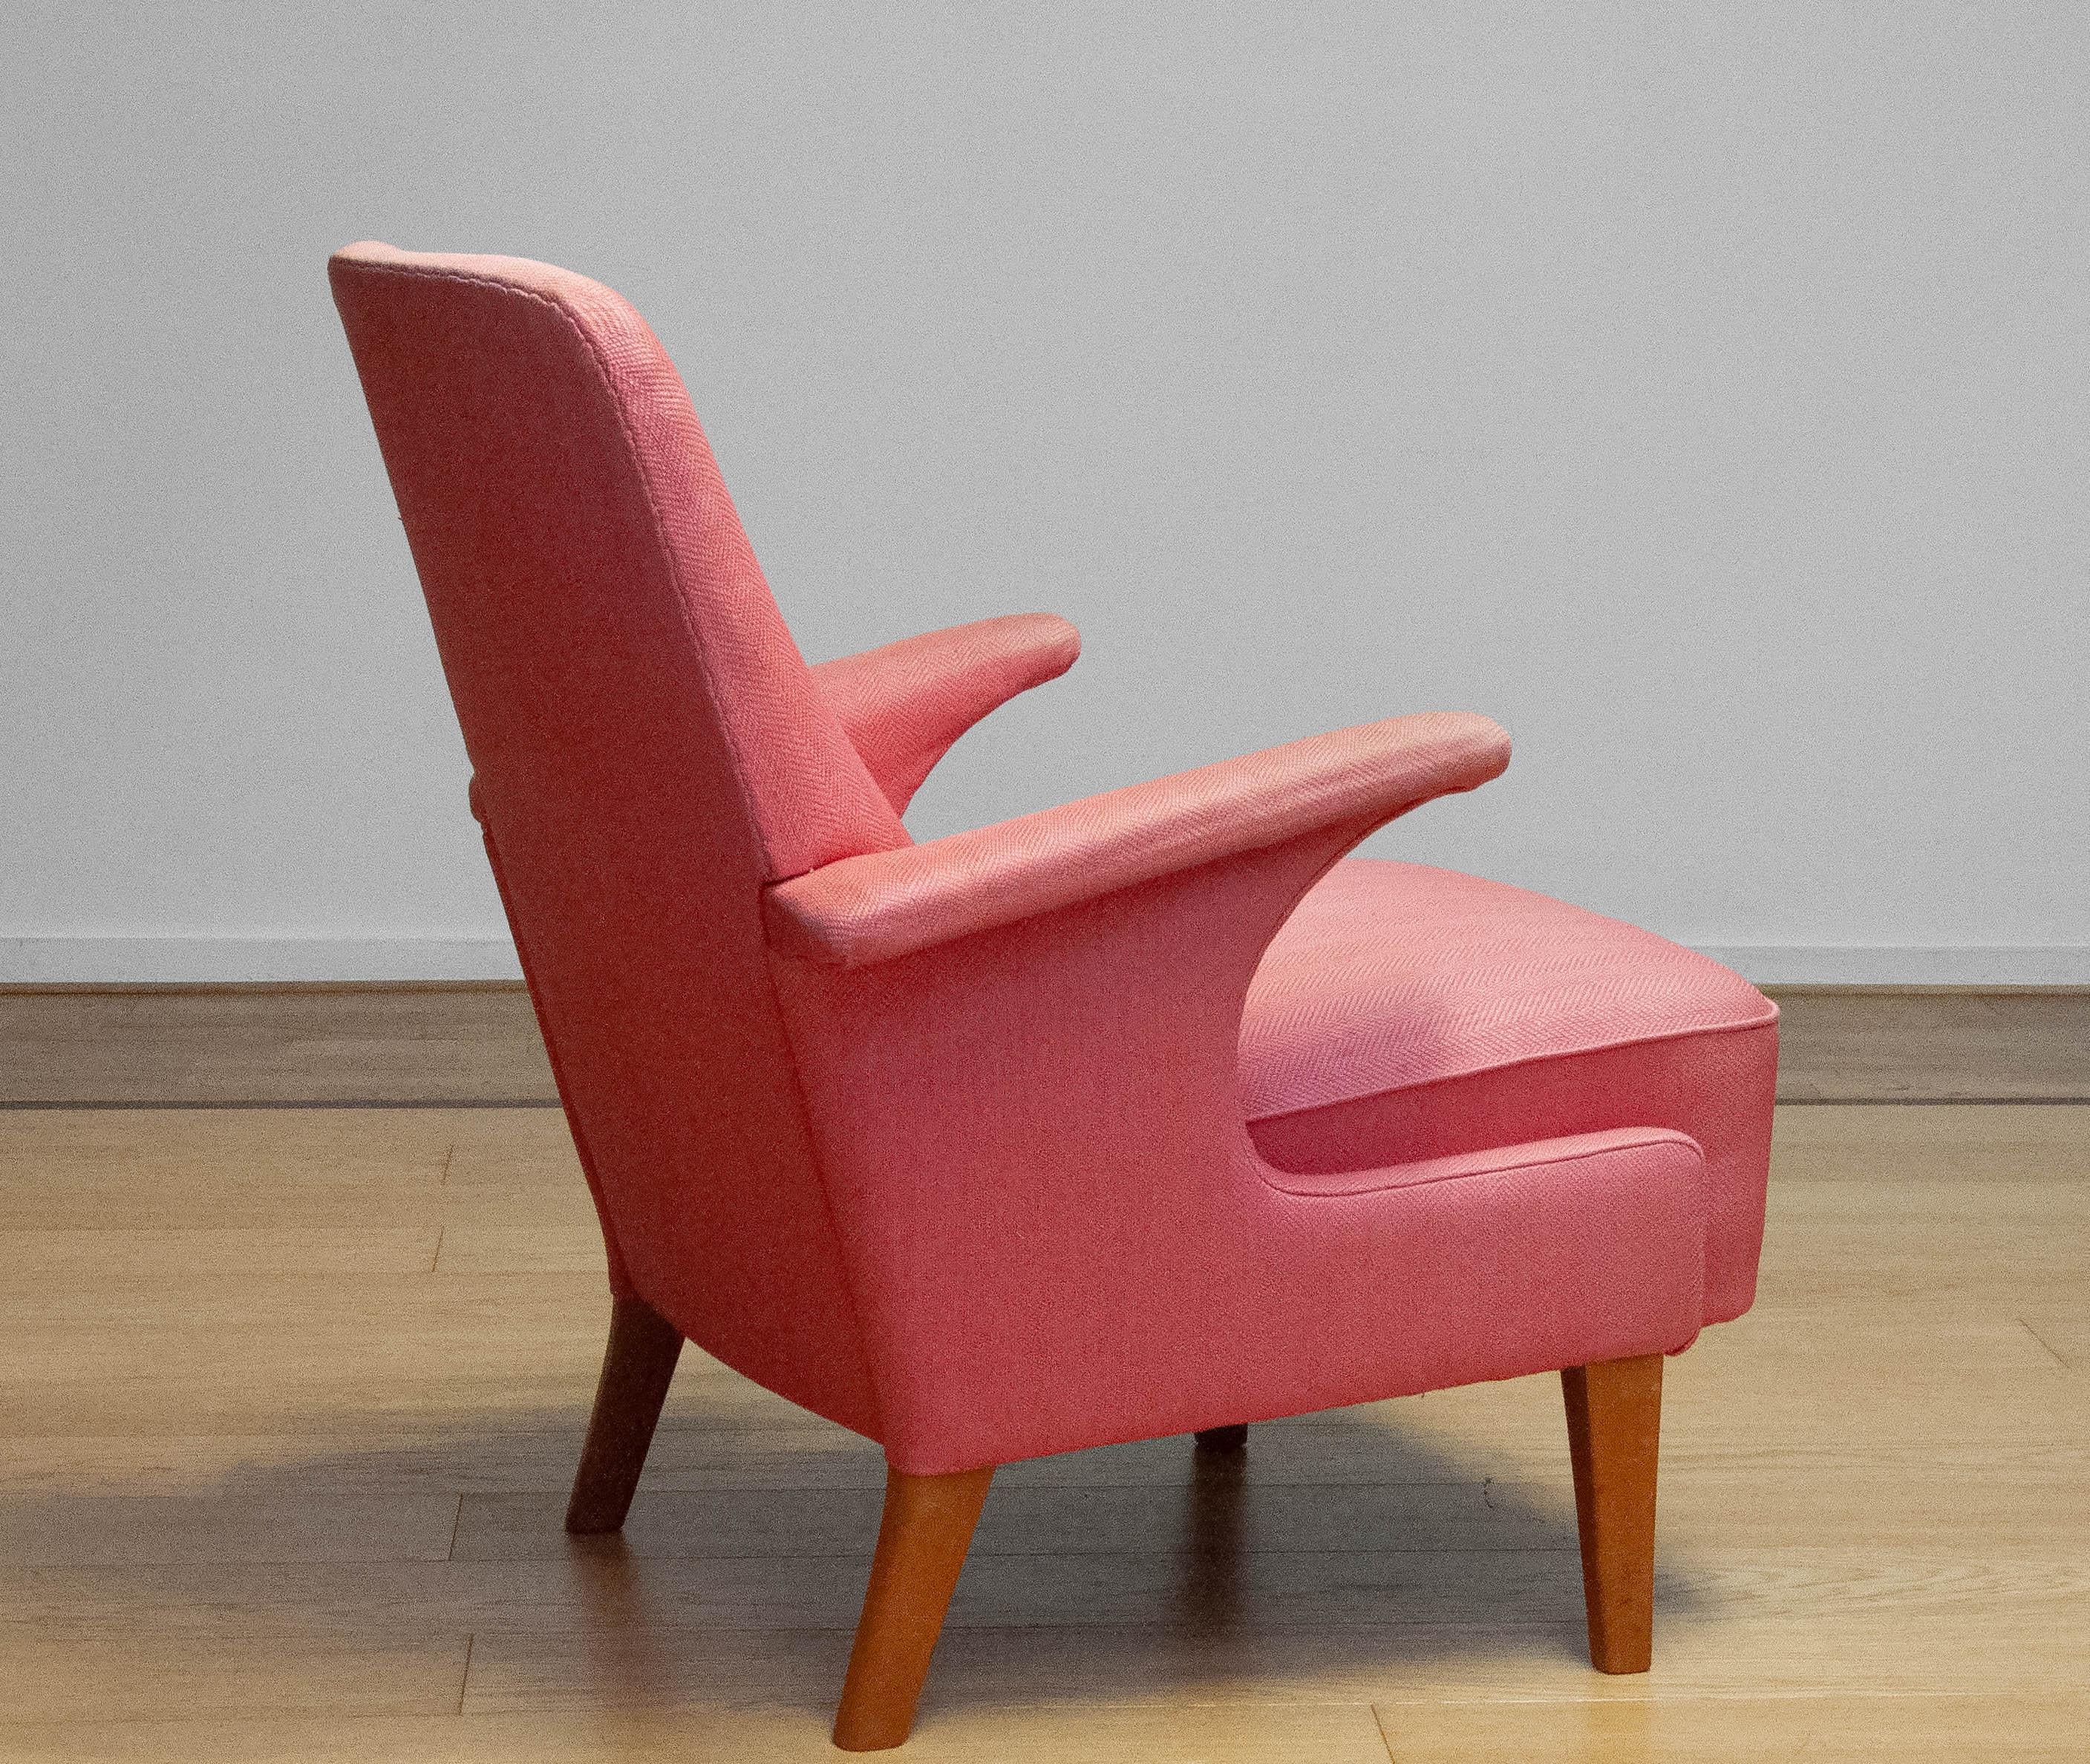 1950 Armchair / Lounge Chair With Powder Pink Wool Upholstery By Dux From Sweden In Good Condition For Sale In Silvolde, Gelderland